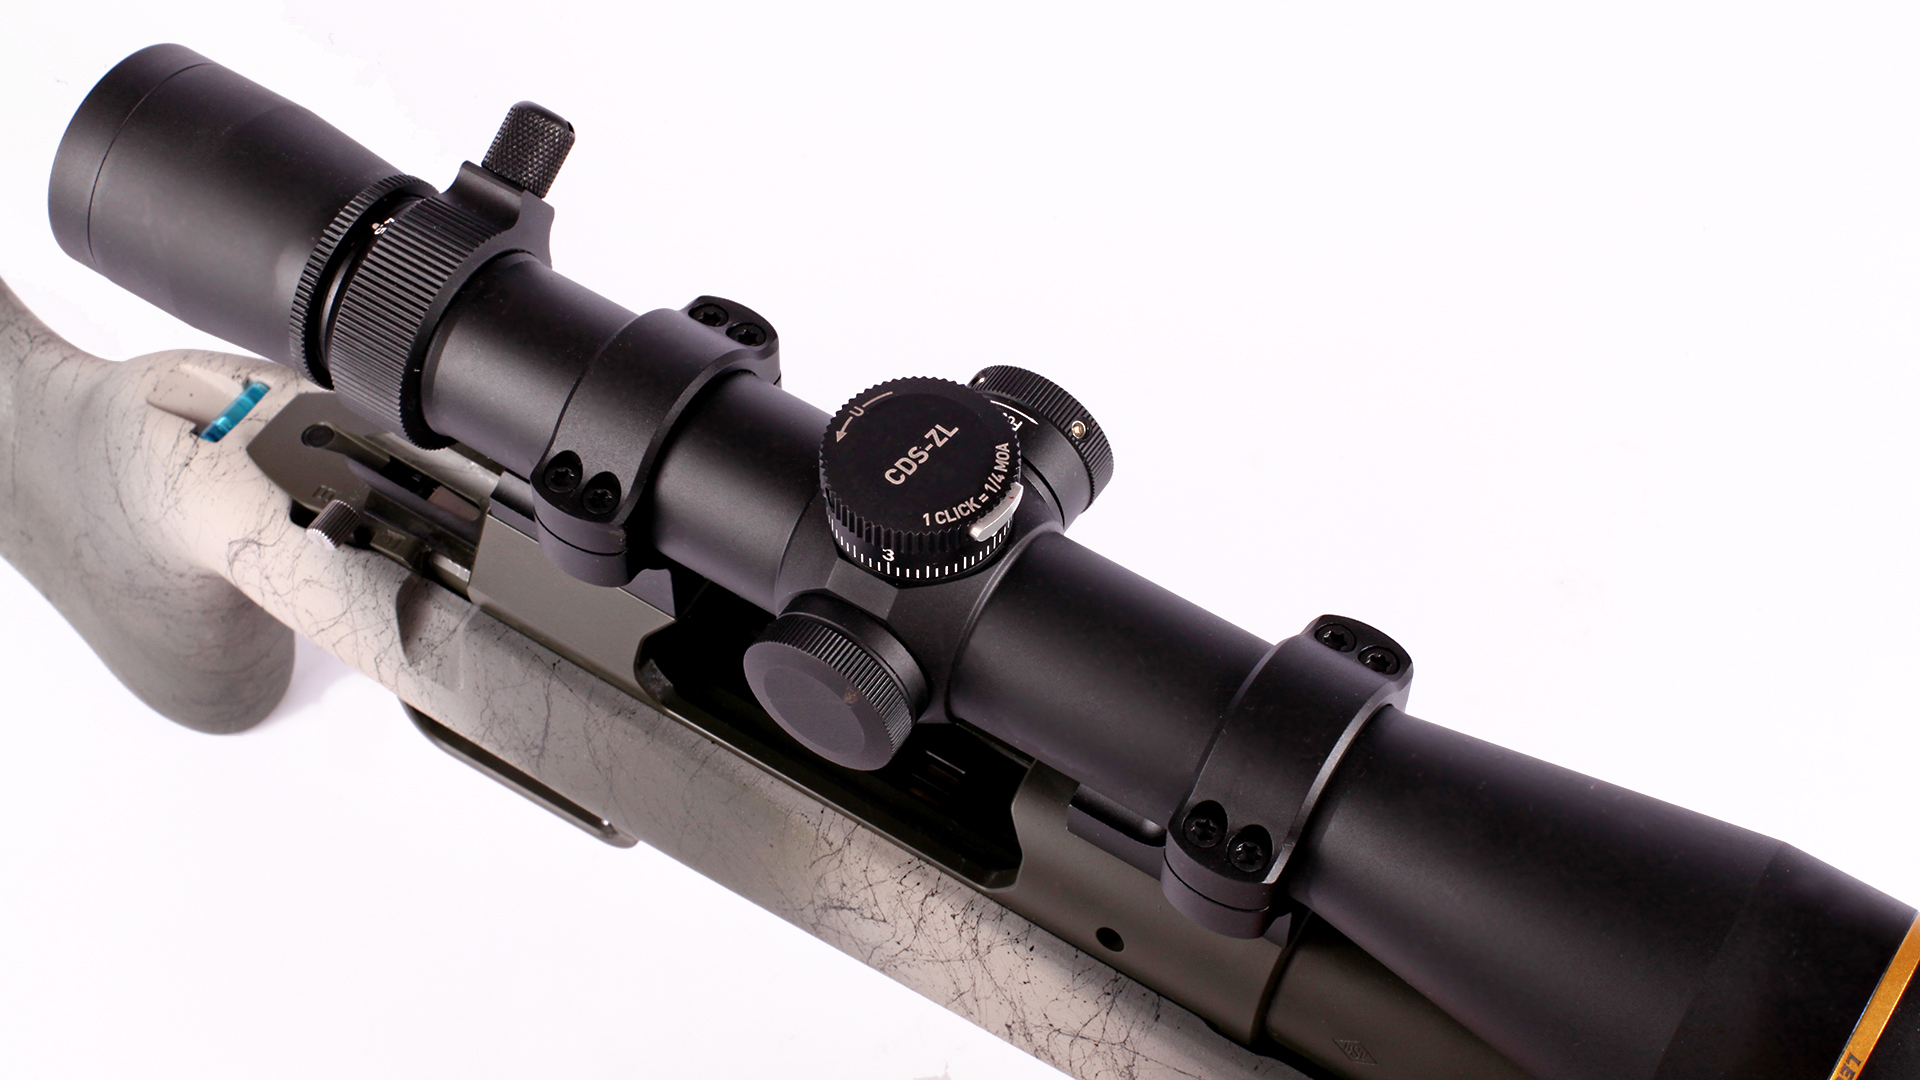 Leupold Riflescope fixed to Springfield Armory Redline bolt-action hunting rifle